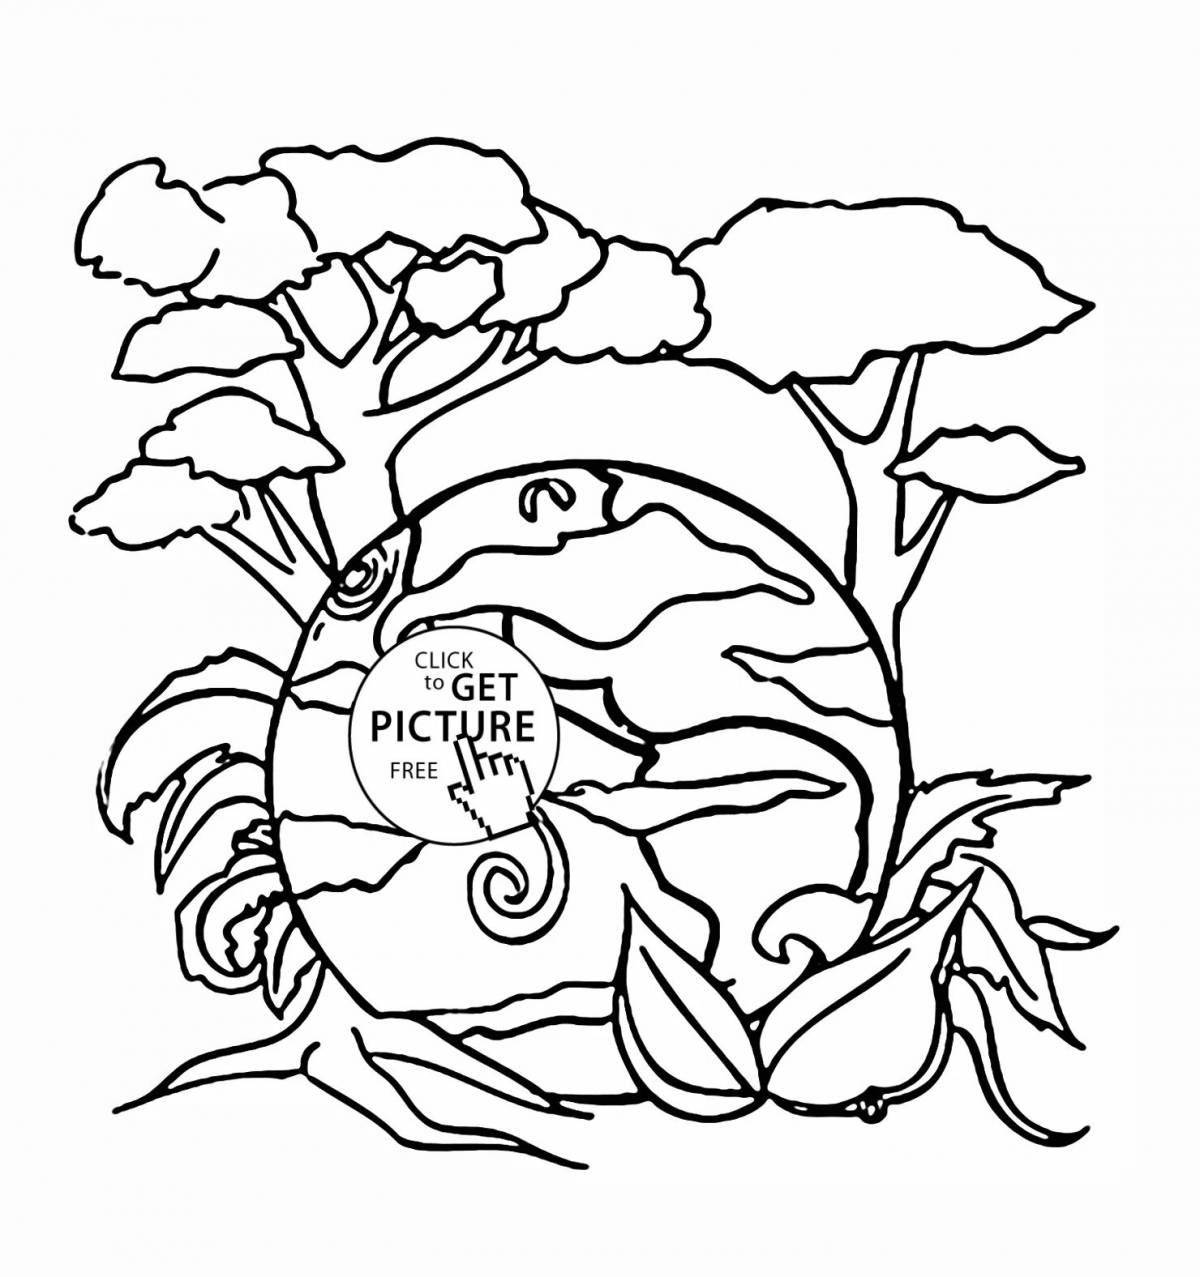 Green ecologist coloring book